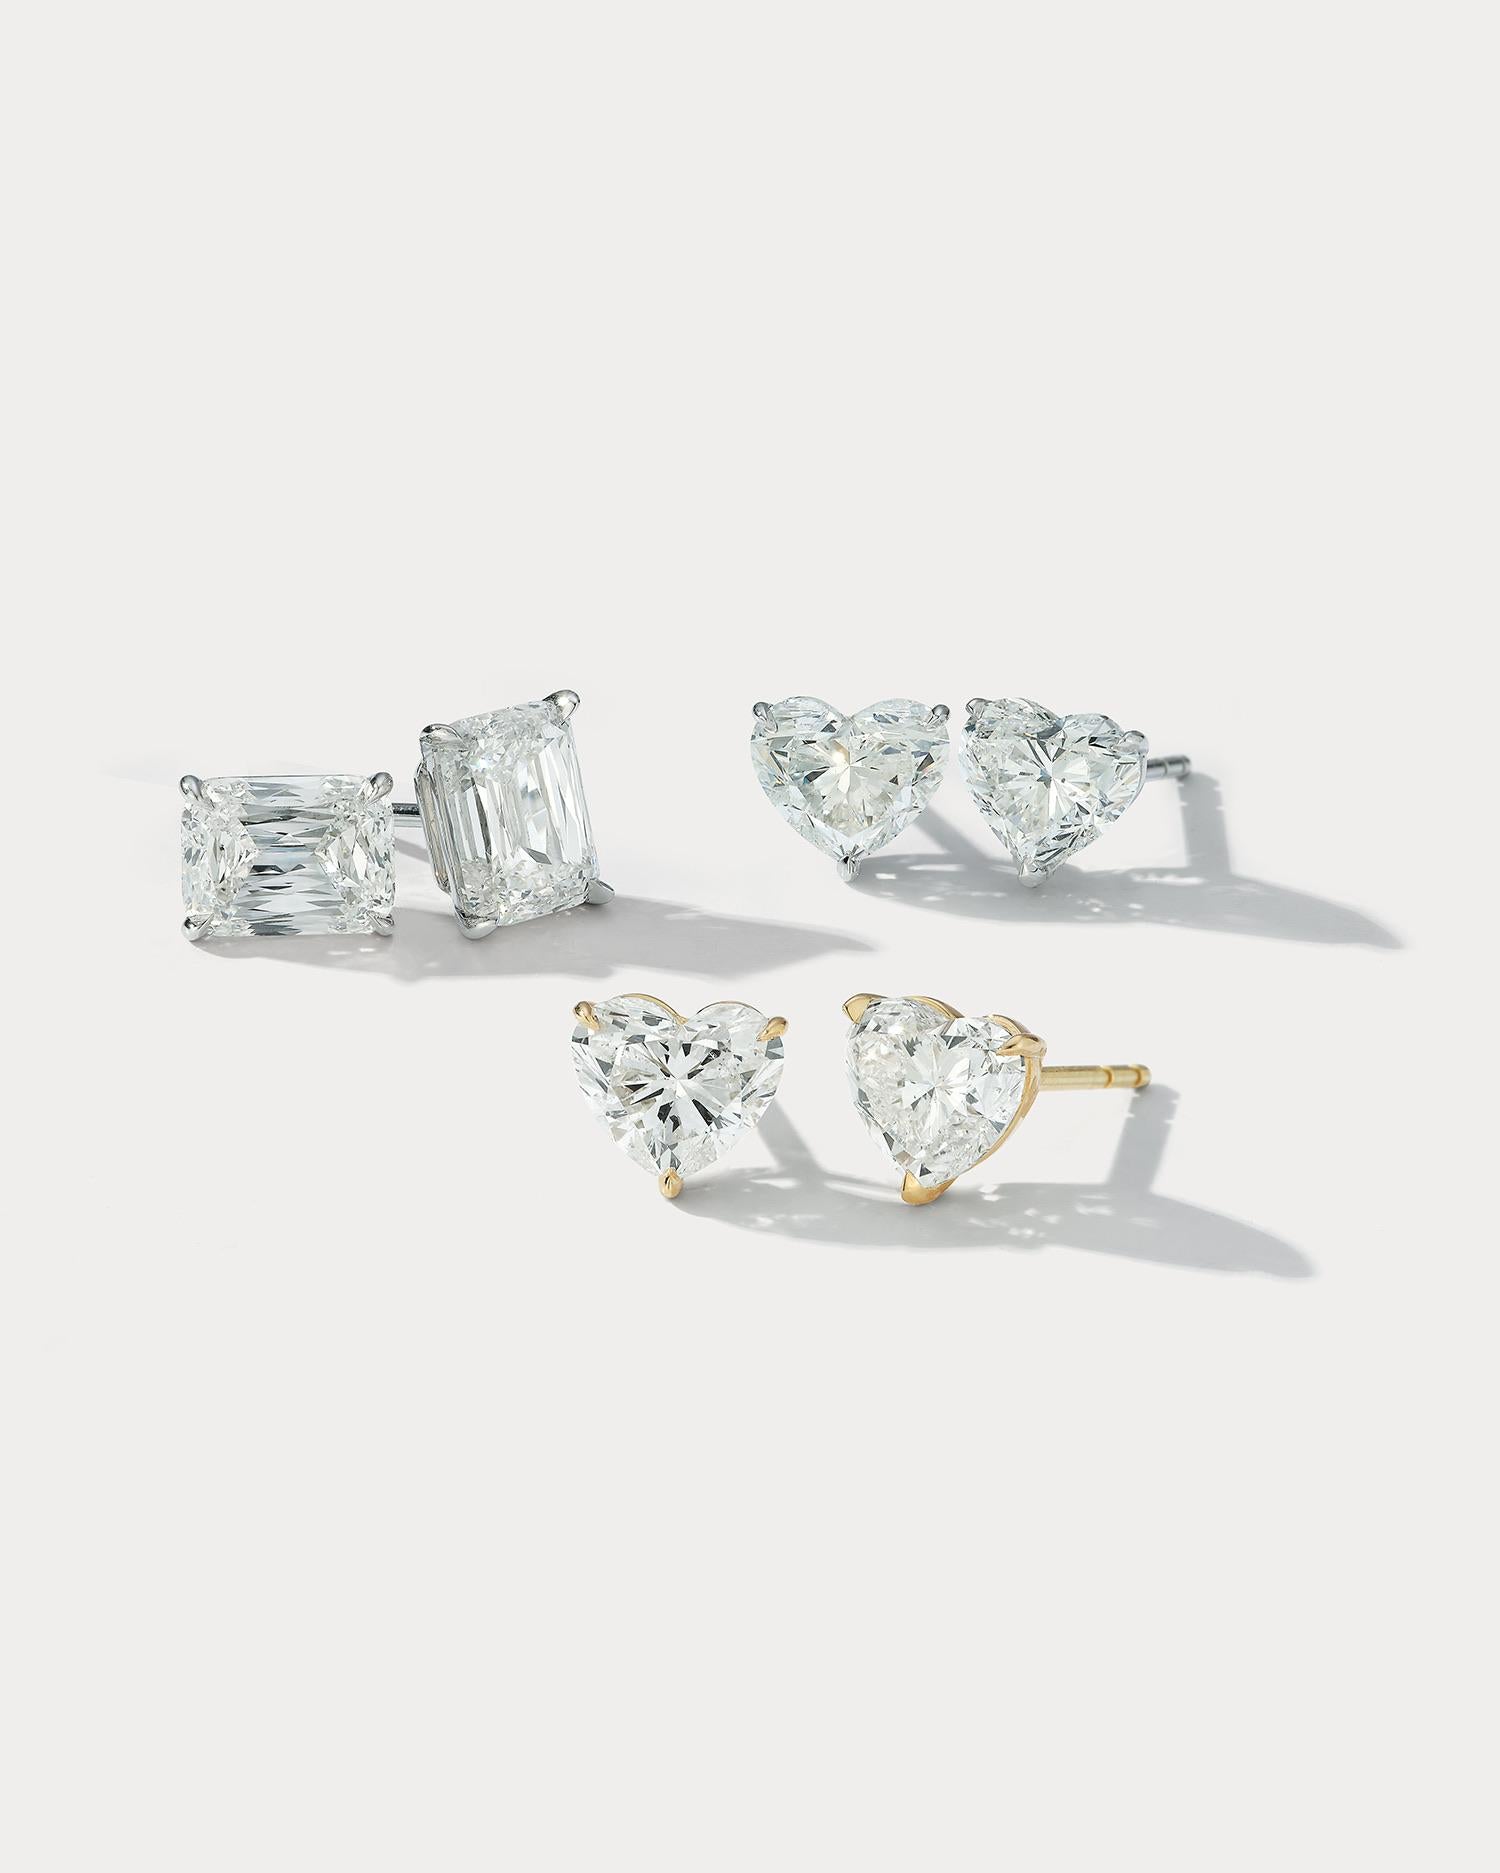 These are 4.02 total weight Heart Shape Stud Earrings set in Platinum.  A perfect choice for those seeking a timeless and sentimental piece of jewelry. The platinum setting provides a luxurious and durable setting for the stones, ensuring they will